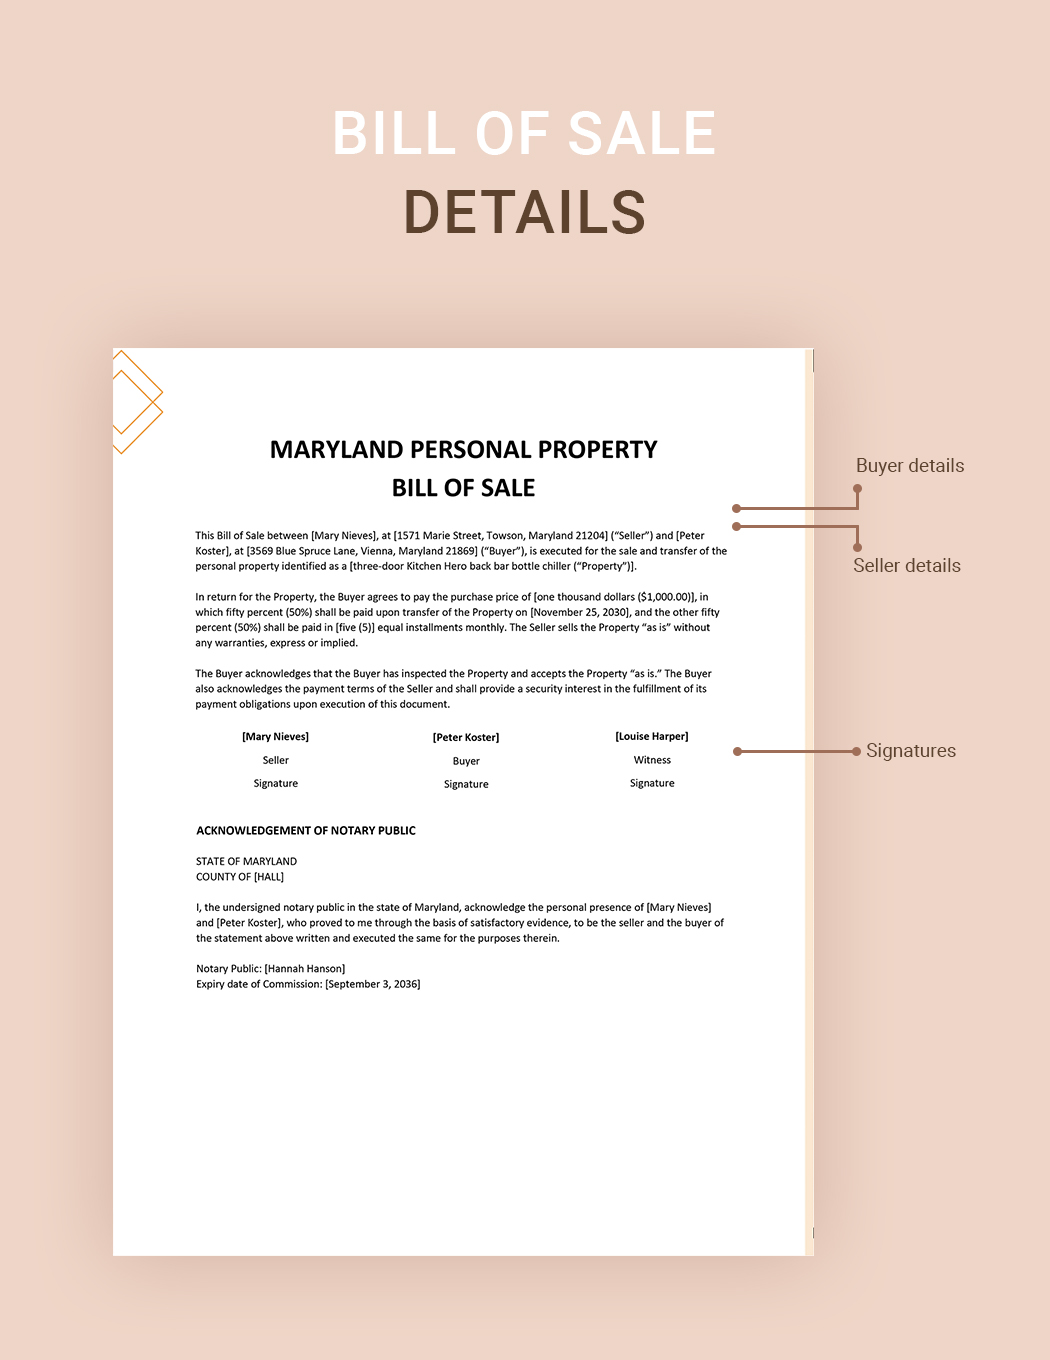 Maryland Personal Property Bill of Sale Form Template